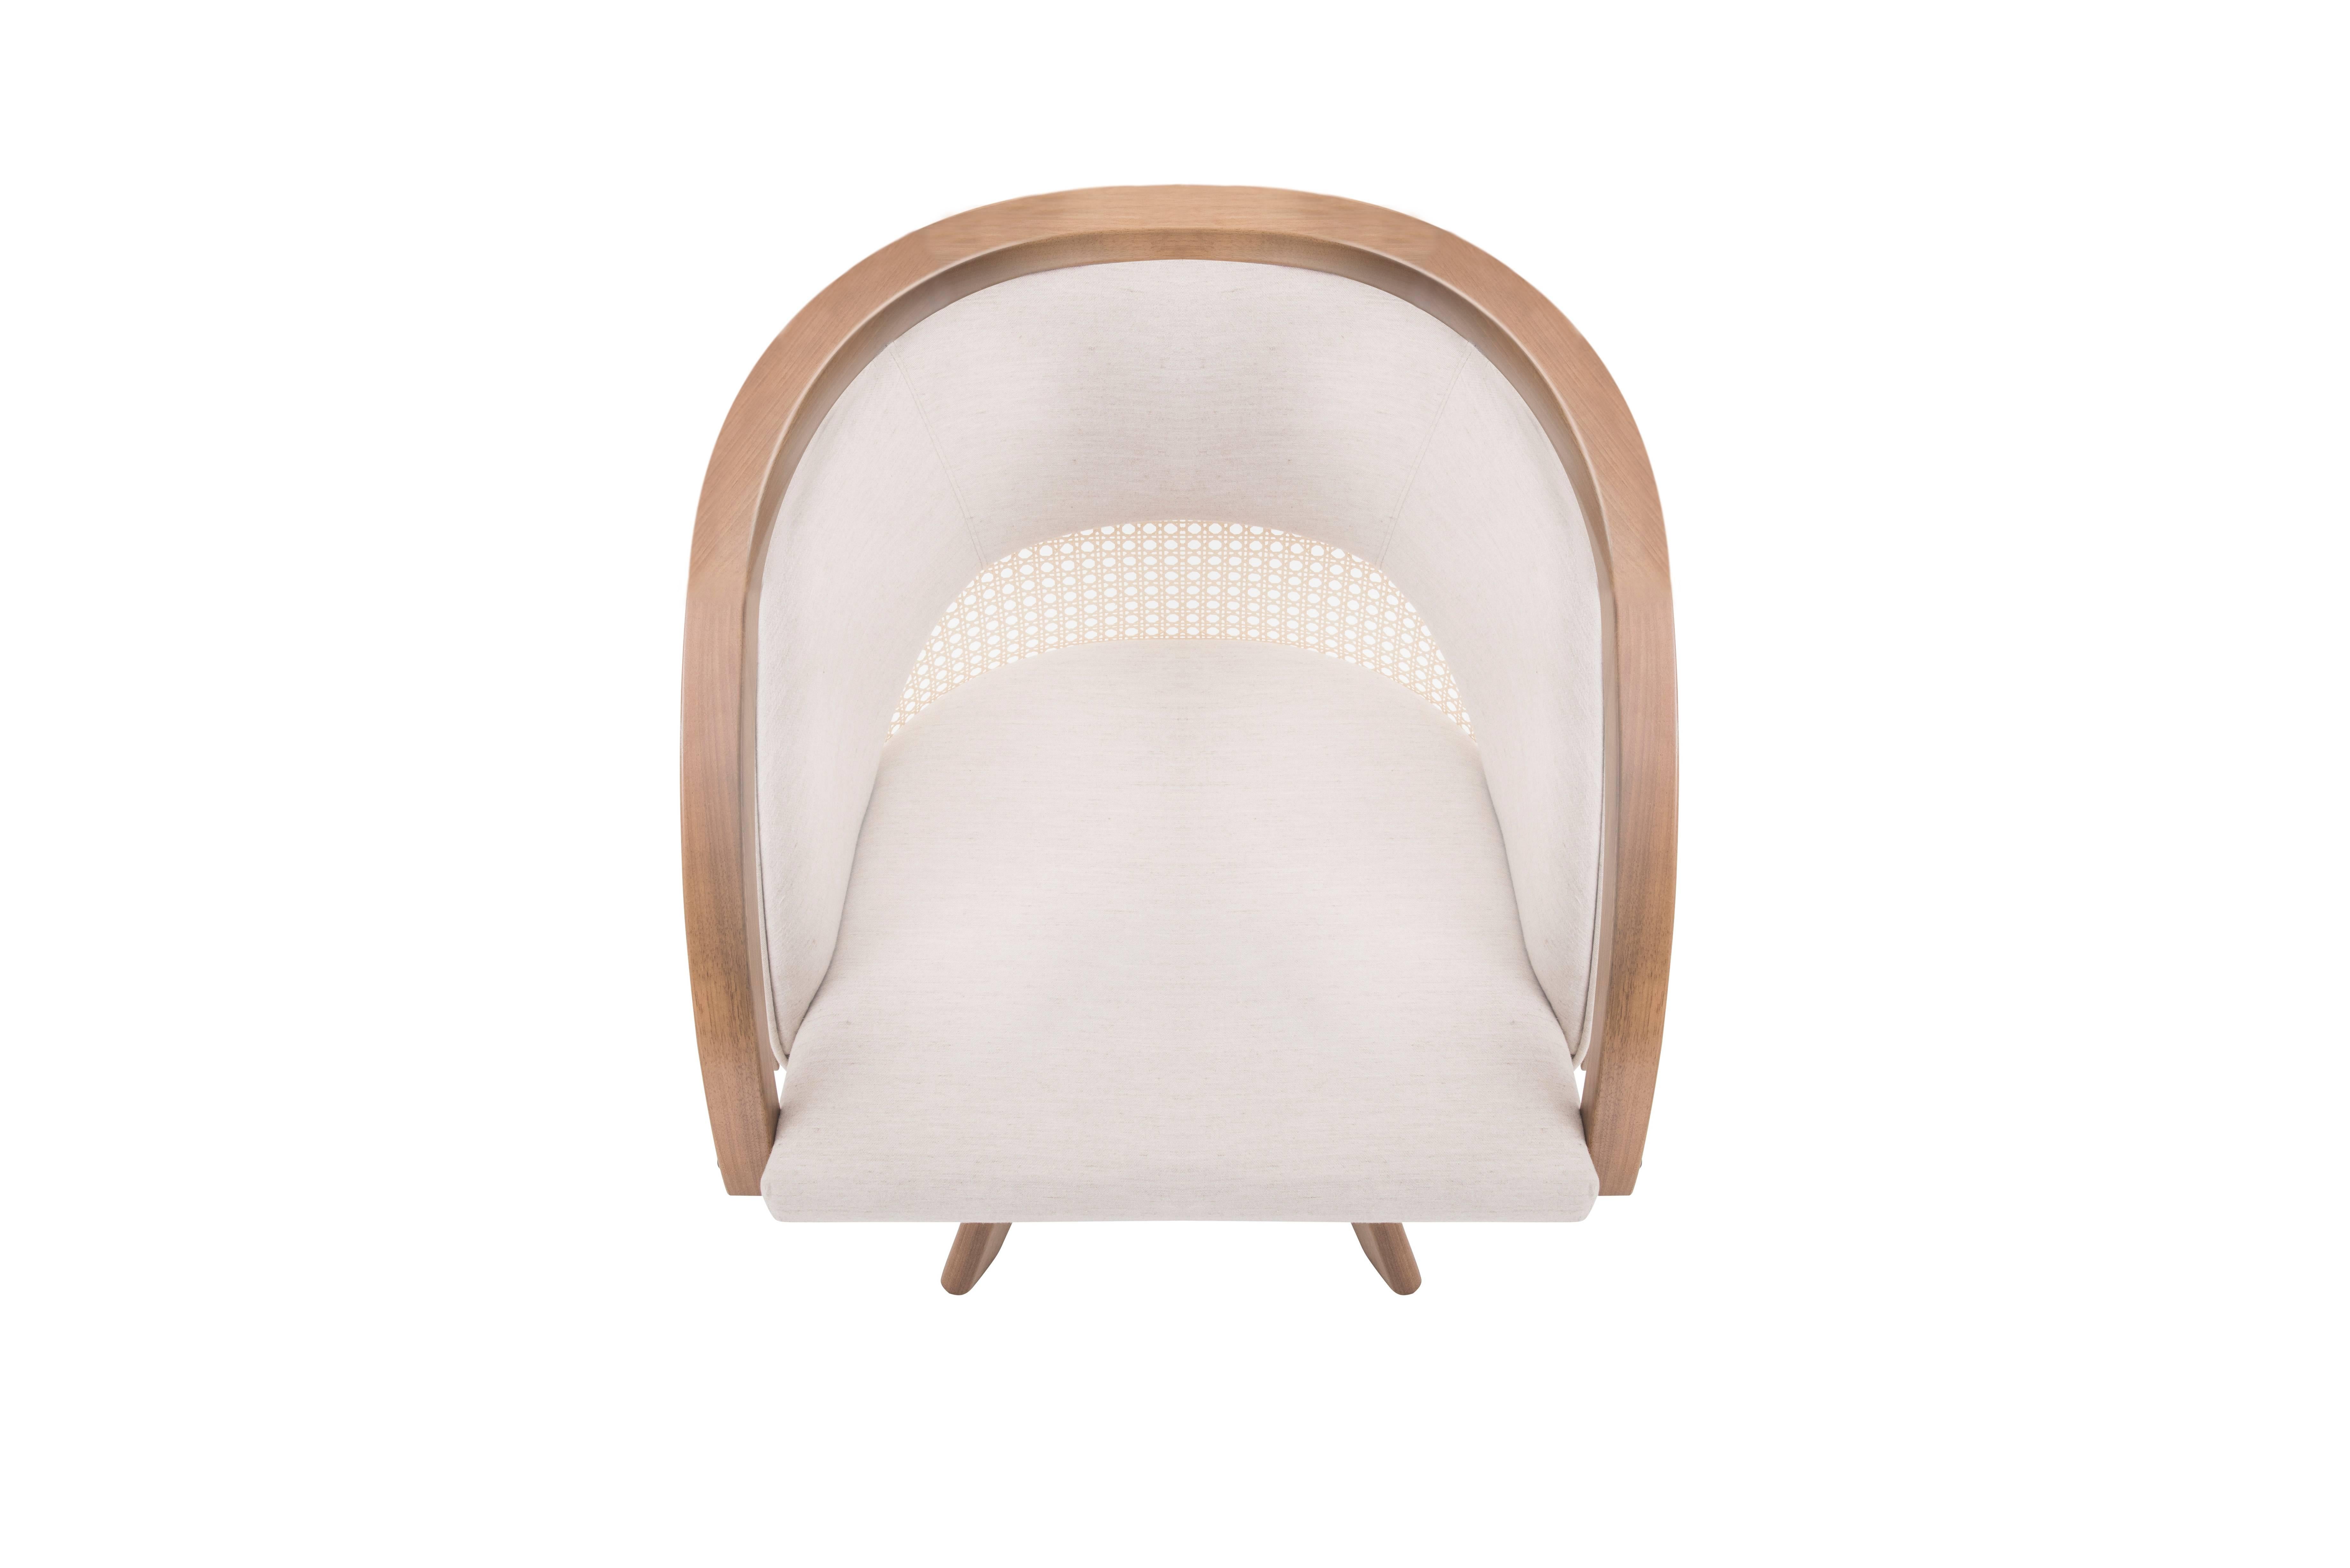 Feminine, delicate and practical. The Flor armchair has a connection with the Brazilian modern woman's seat. Sinuous lines translate the essence of well-being to the piece - with rotating feet, its lateral view refers to the petal of a flower. The